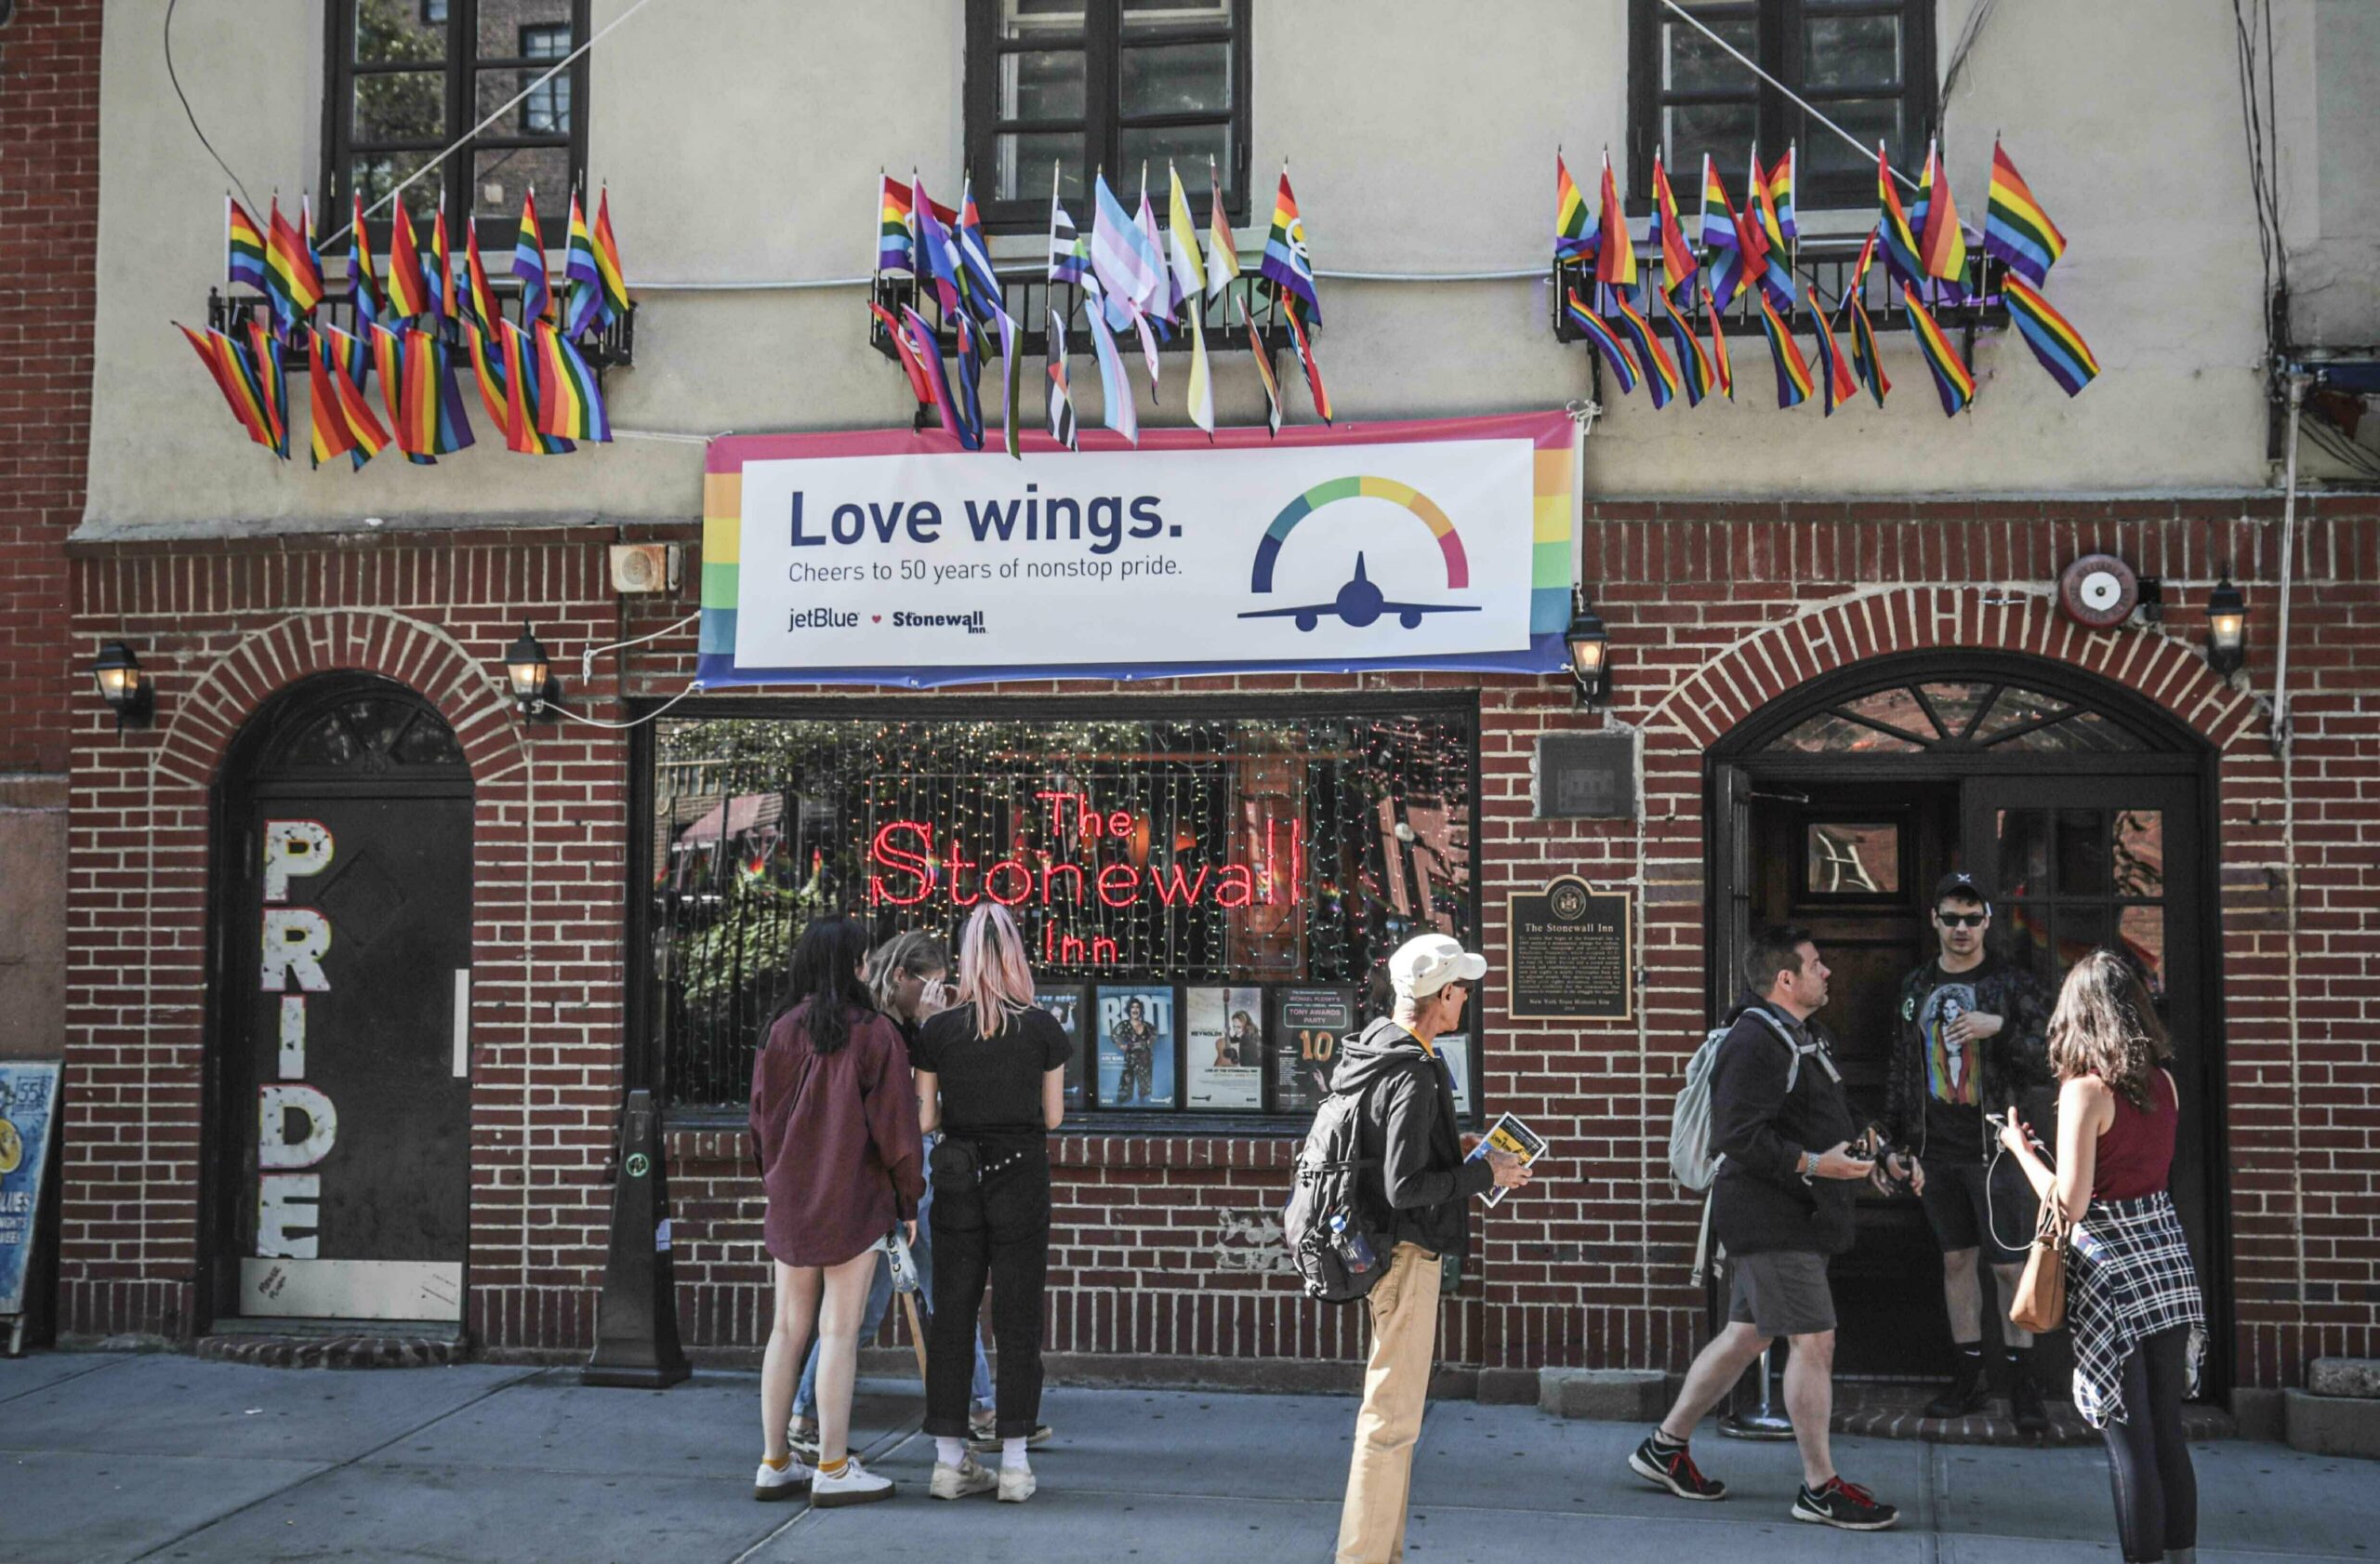 FILE - In this Monday, June 3, 2019, file photo, Pride flags and colors display on the Stonewall Inn bar, marking the site of 1969 riots that followed a police raid of the bar's gay patrons, in New York. A visitor center dedicated to telling the story of LGBTQ rights movement will open next door to the Stonewall Inn. Organizers say the groundbreaking for the Stonewall National Monument Visitor Center in New York City's Greenwich Village neighborhood will take place Friday, June 24, 2022. (AP Photo/Bebeto Matthews, File)